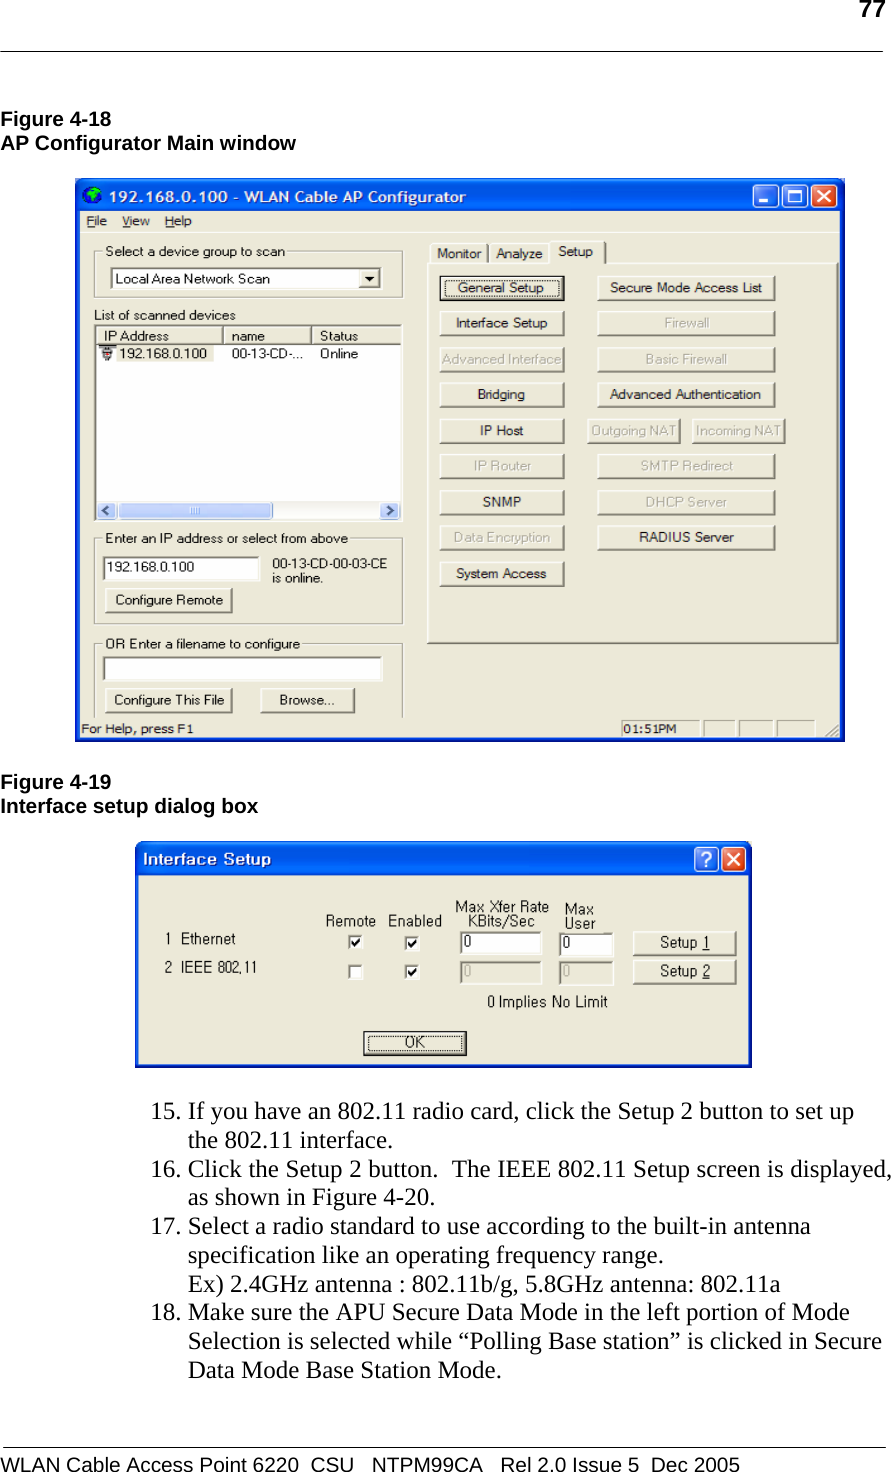   77  WLAN Cable Access Point 6220  CSU   NTPM99CA   Rel 2.0 Issue 5  Dec 2005 Figure 4-18  AP Configurator Main window    Figure 4-19 Interface setup dialog box    15. If you have an 802.11 radio card, click the Setup 2 button to set up the 802.11 interface. 16. Click the Setup 2 button.  The IEEE 802.11 Setup screen is displayed, as shown in Figure 4-20.  17. Select a radio standard to use according to the built-in antenna specification like an operating frequency range.  Ex) 2.4GHz antenna : 802.11b/g, 5.8GHz antenna: 802.11a  18. Make sure the APU Secure Data Mode in the left portion of Mode Selection is selected while “Polling Base station” is clicked in Secure Data Mode Base Station Mode. 